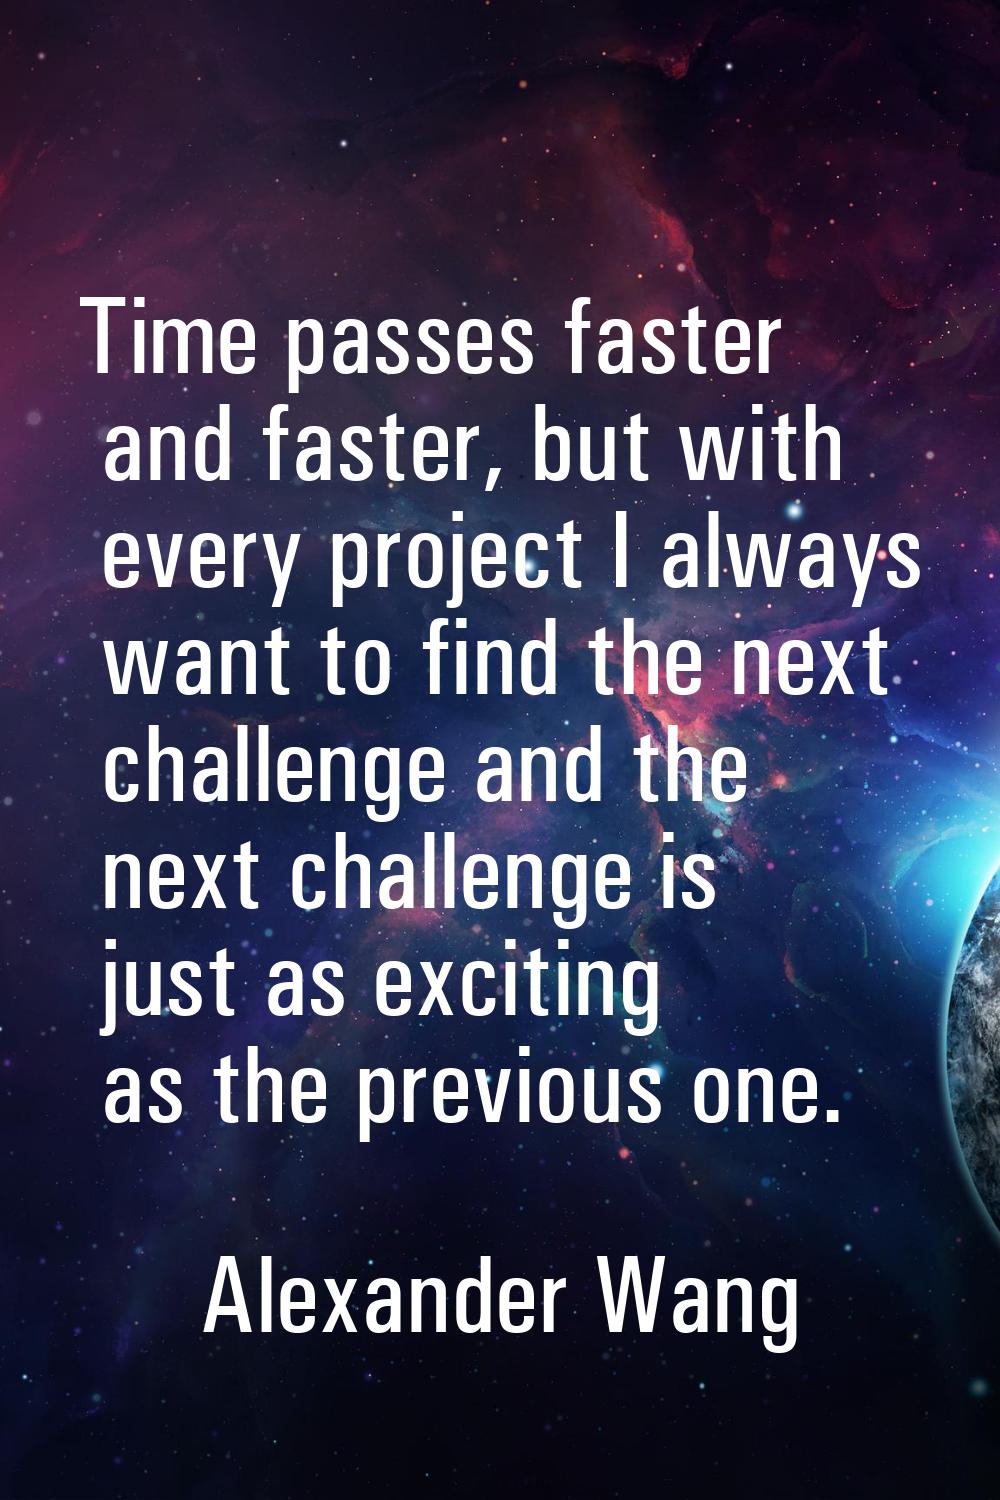 Time passes faster and faster, but with every project I always want to find the next challenge and 